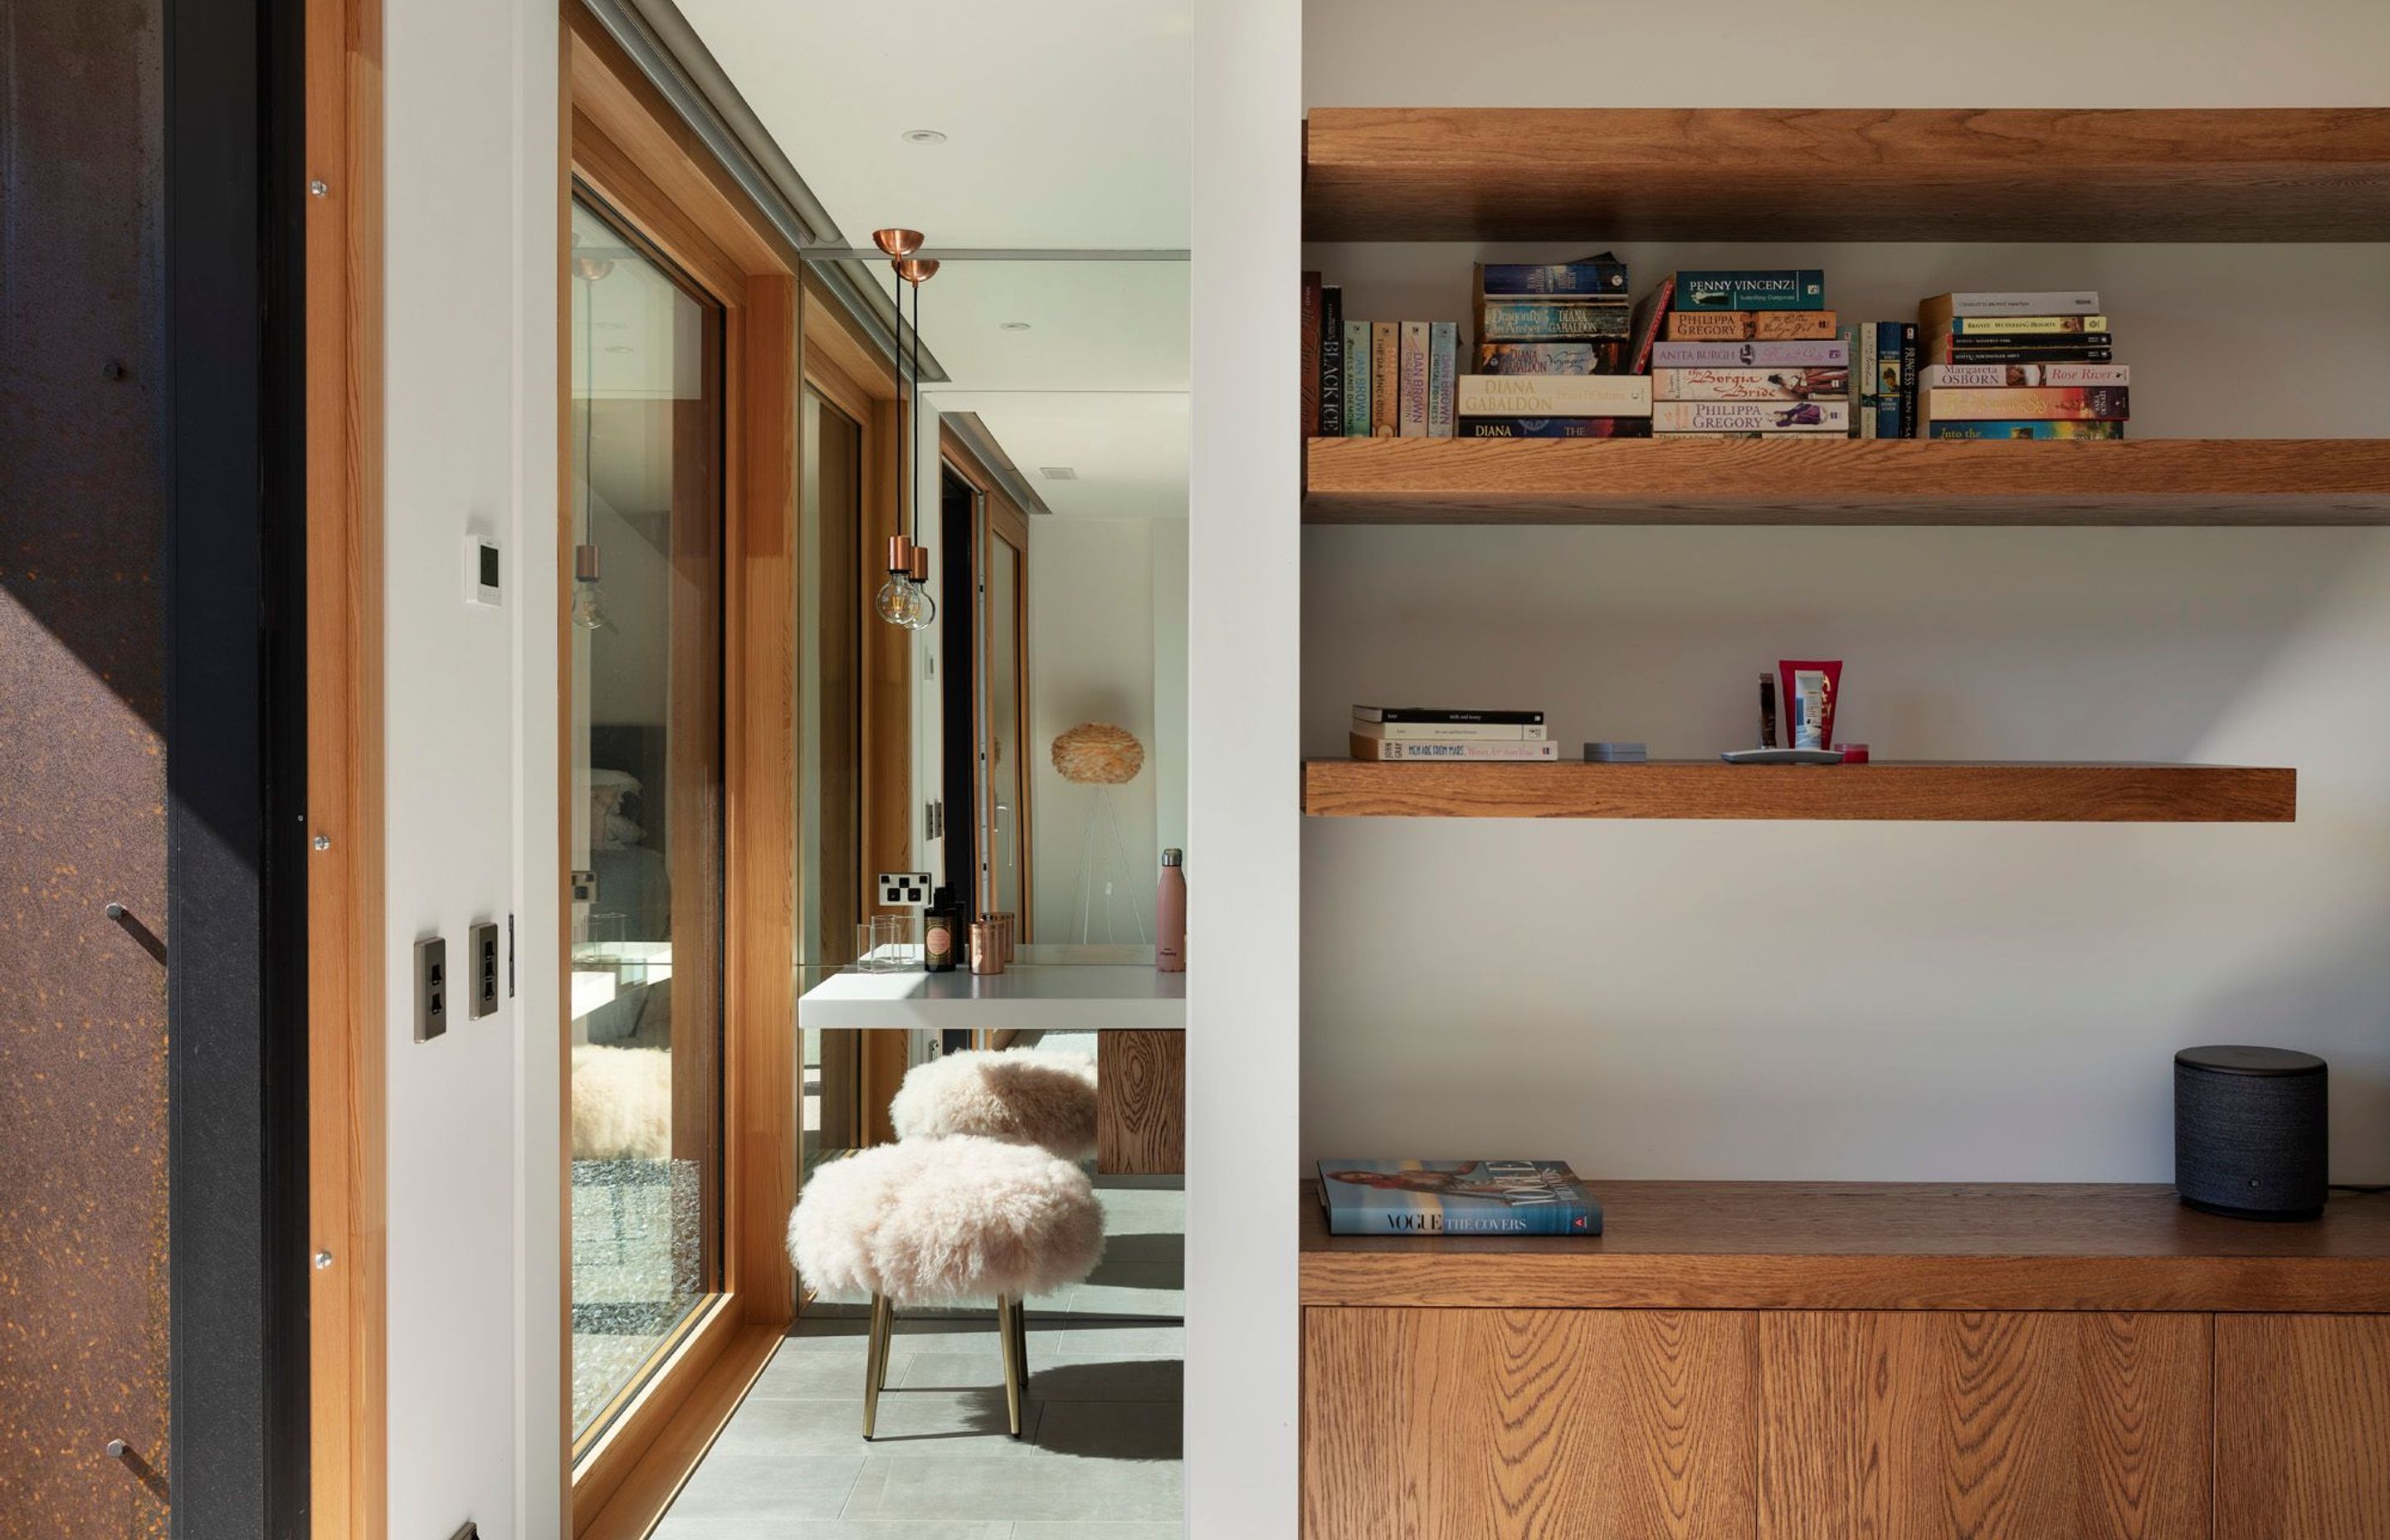 Oak shelving and oak cabinets divides this first-floor bedroom from its en suite bathroom.